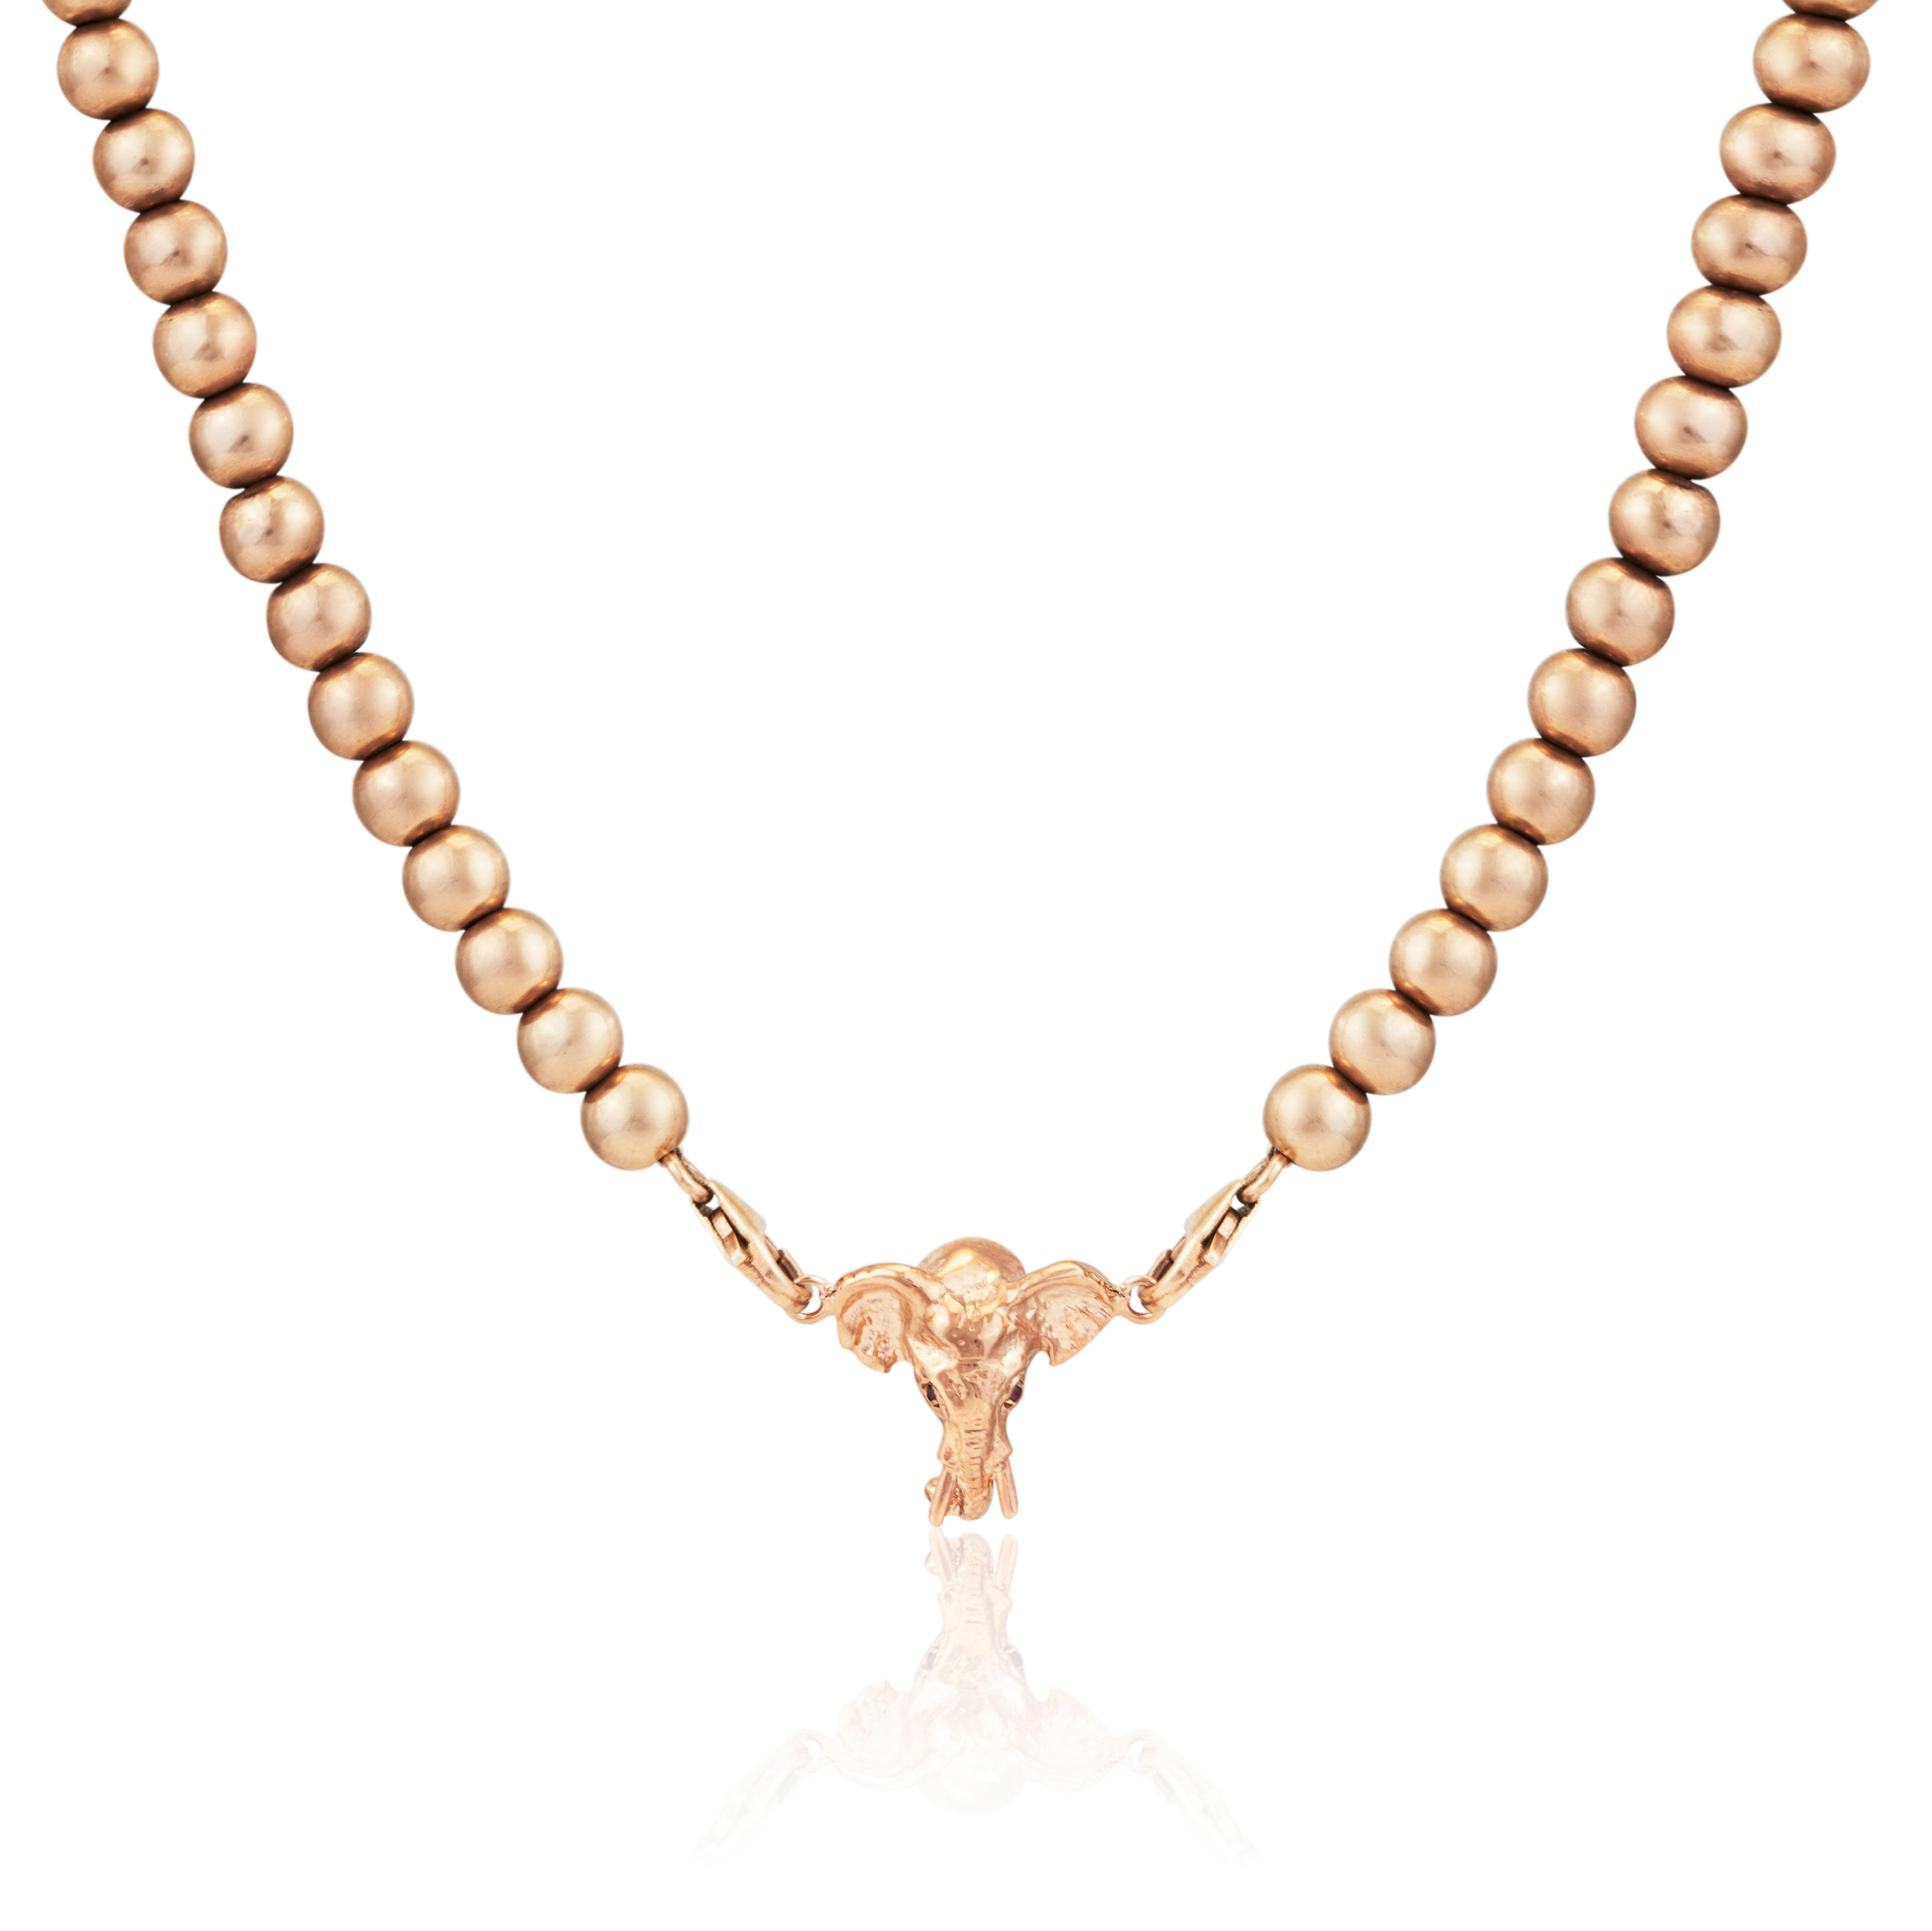 18ct gold bead necklace